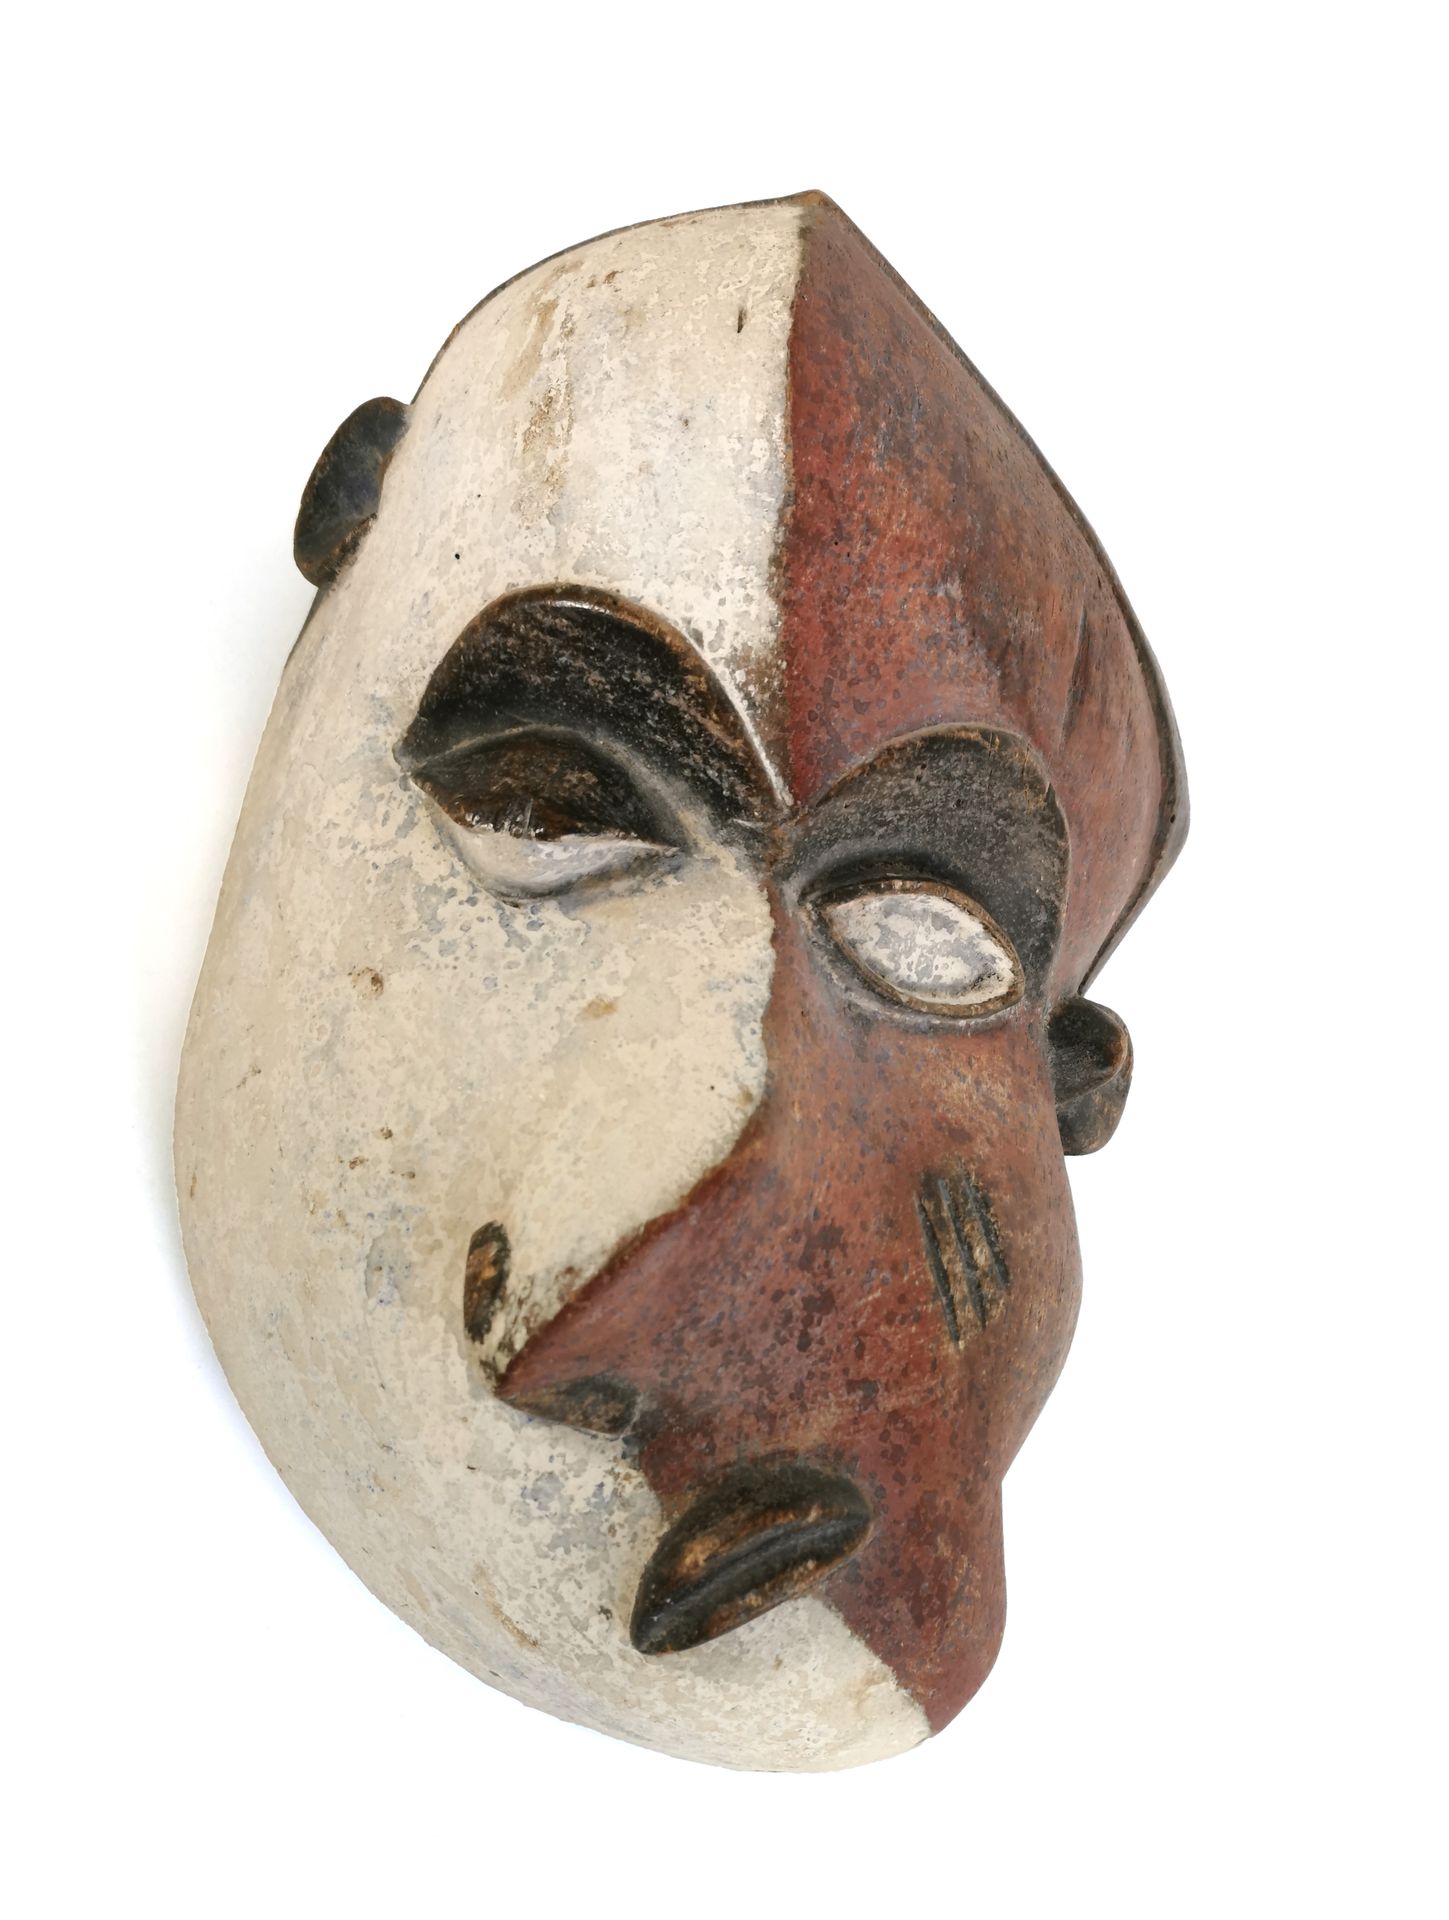 Null PENDE Mask - Democratic Republic of Congo

Mask known as "disease" mask for&hellip;